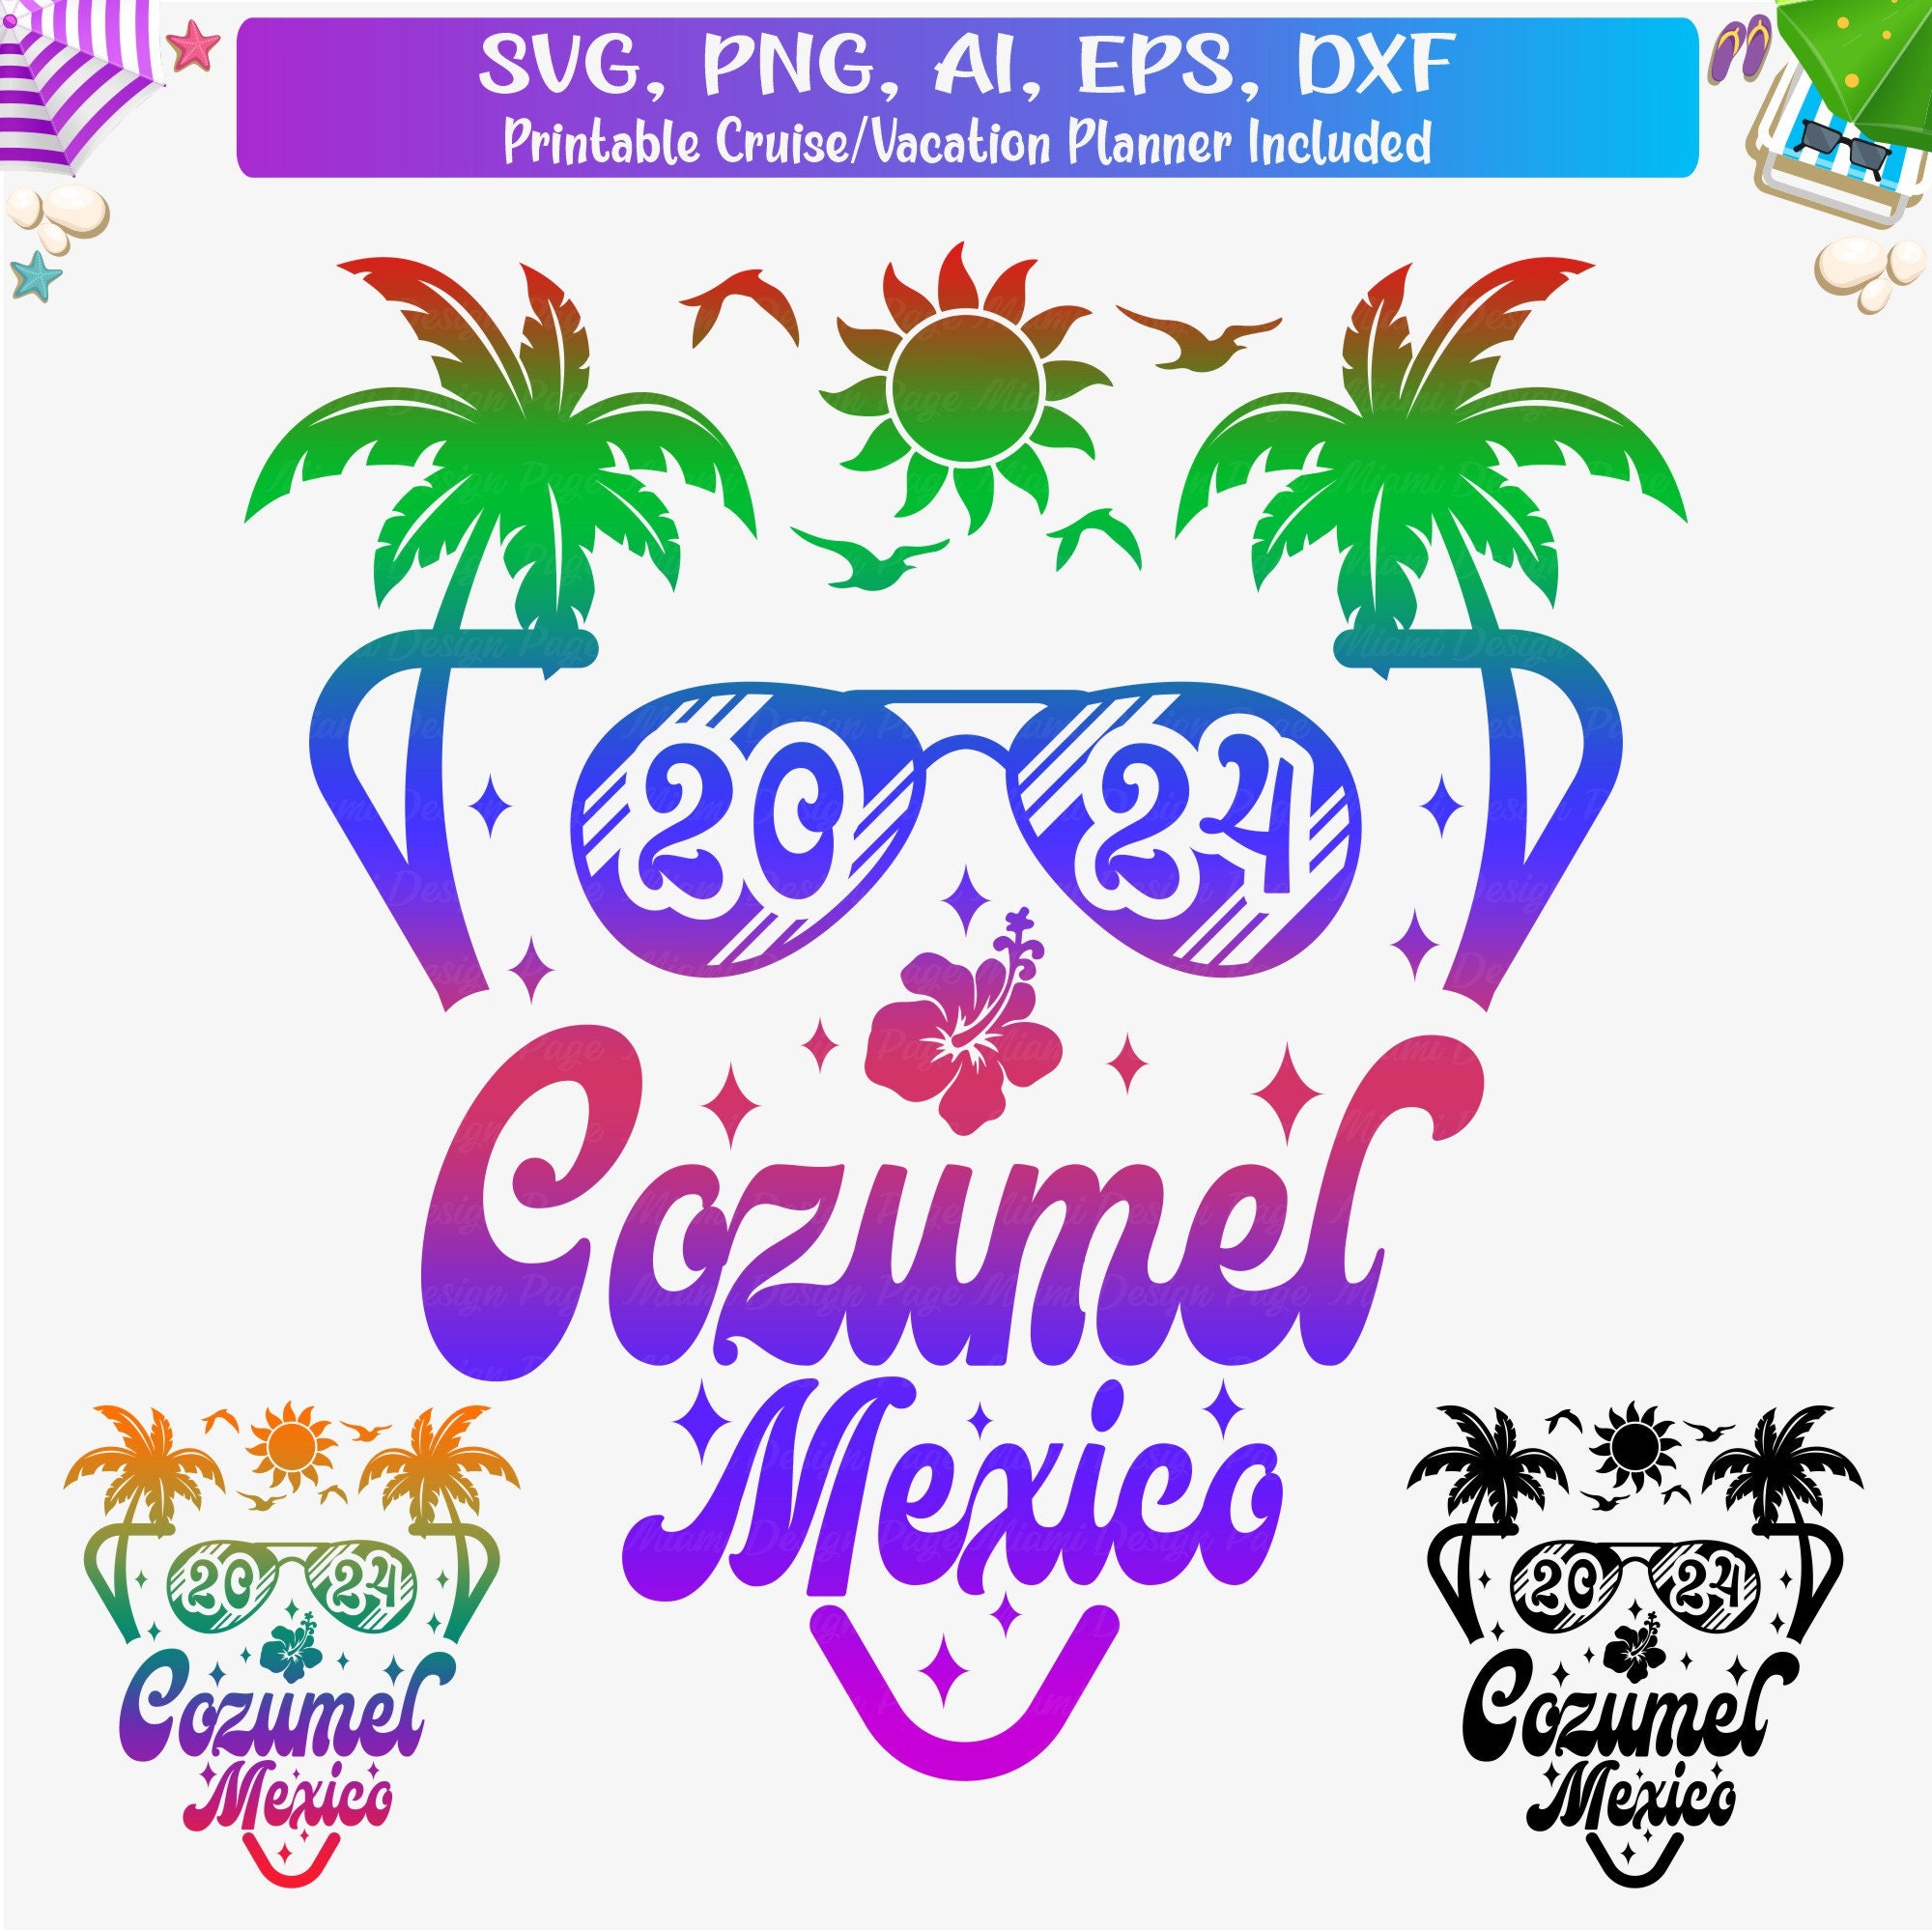 2 Cozumel Mexico Stickers, Hand Drawn Design, Palm Trees Beach Coral Reef,  Laminated, Water Resistant 